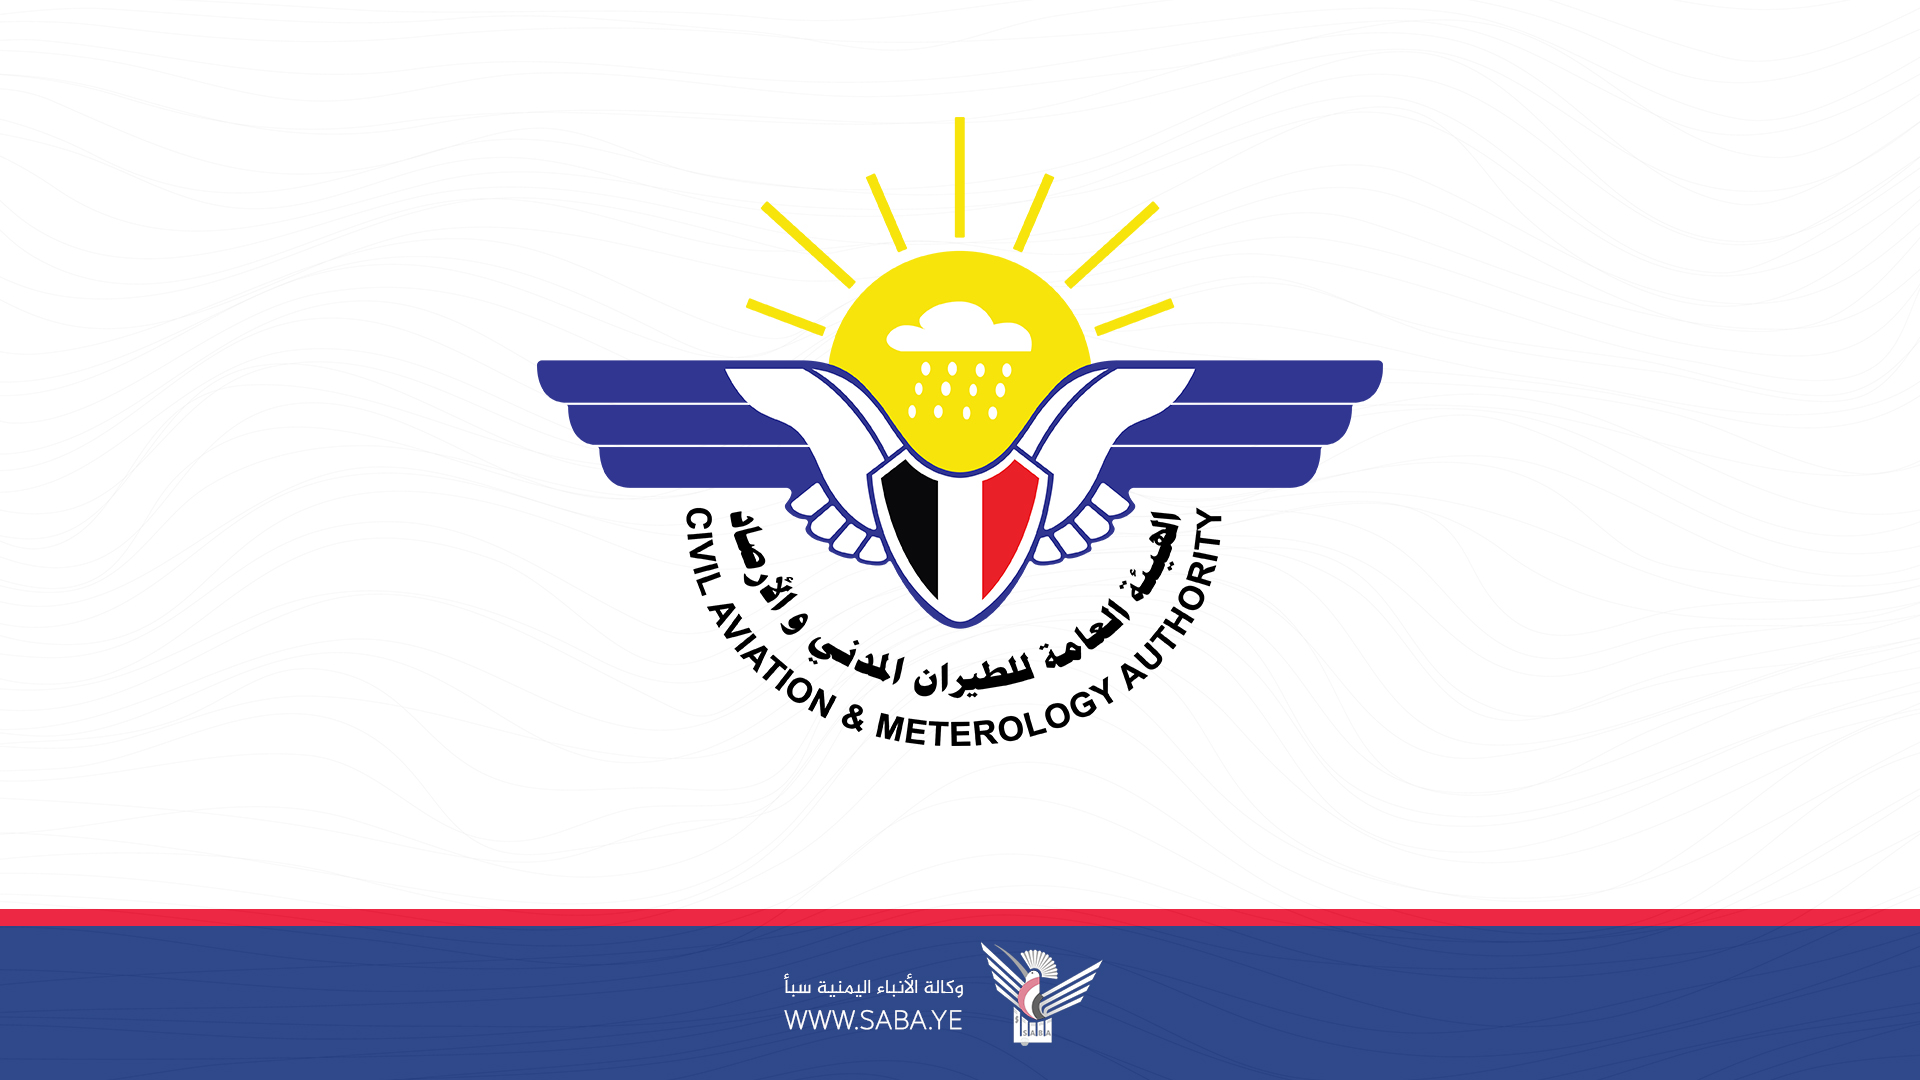 Civil Aviation Authority: Yemenia's decision to stop selling tickets to Sana'a - Amman - Sana'a compounds suffering of Yemenis